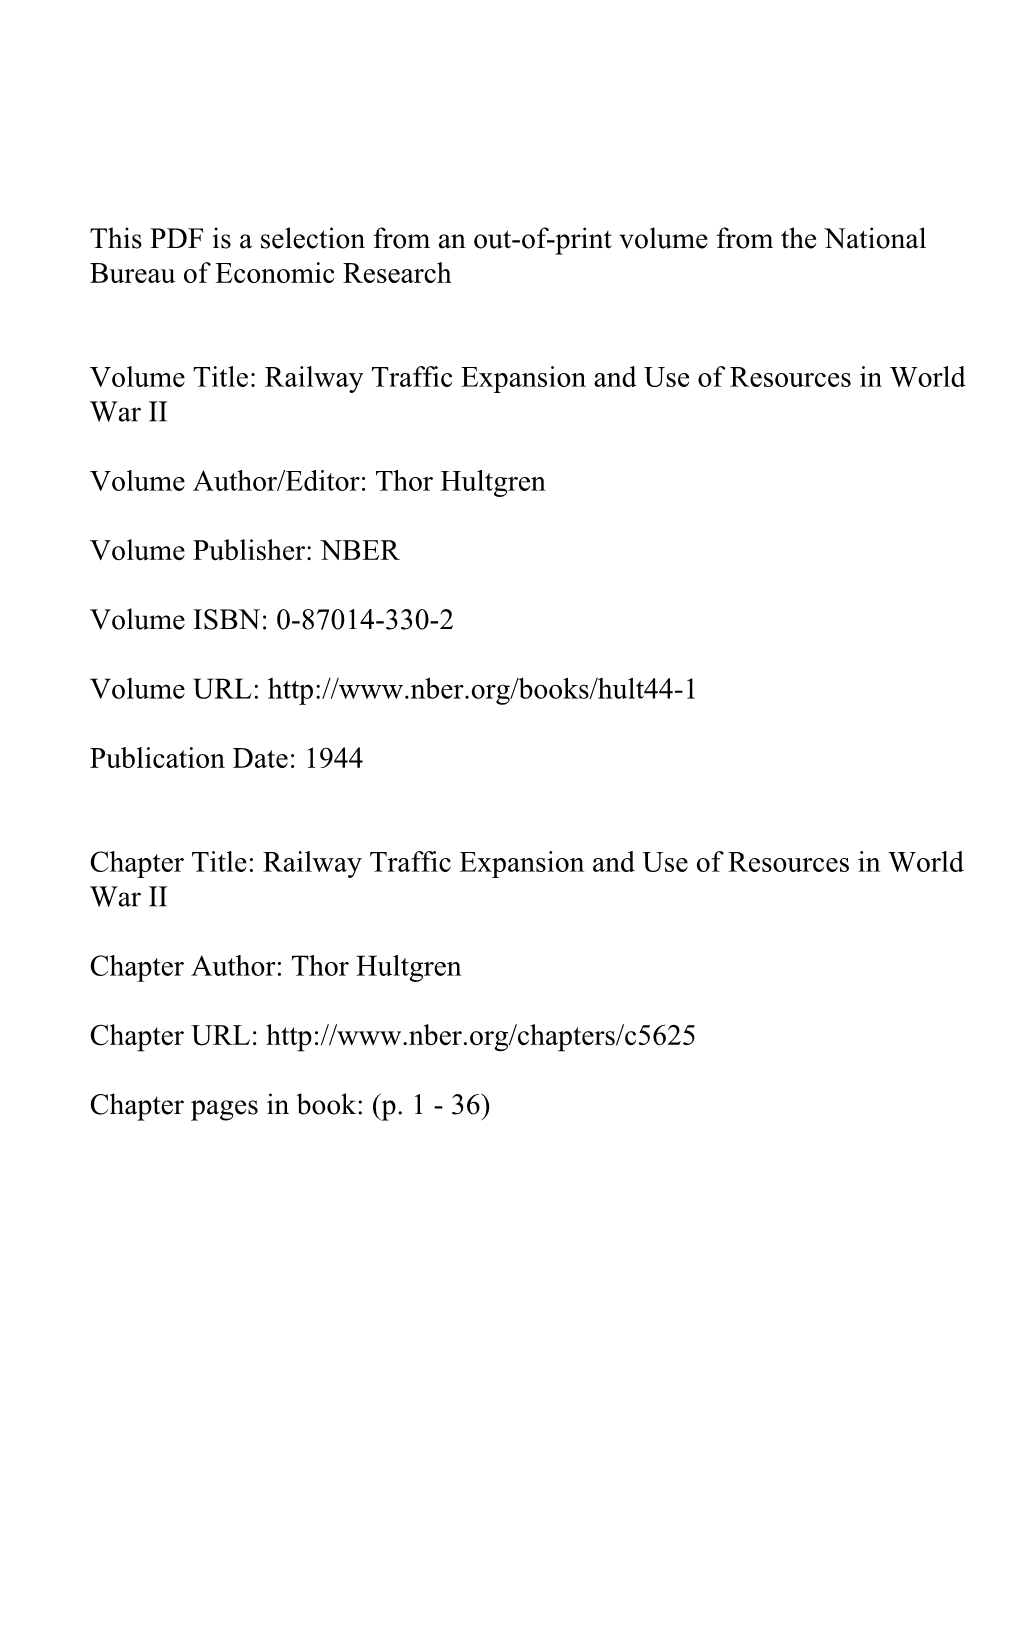 Railway Traffic Expansion and Use of Resources in World War II